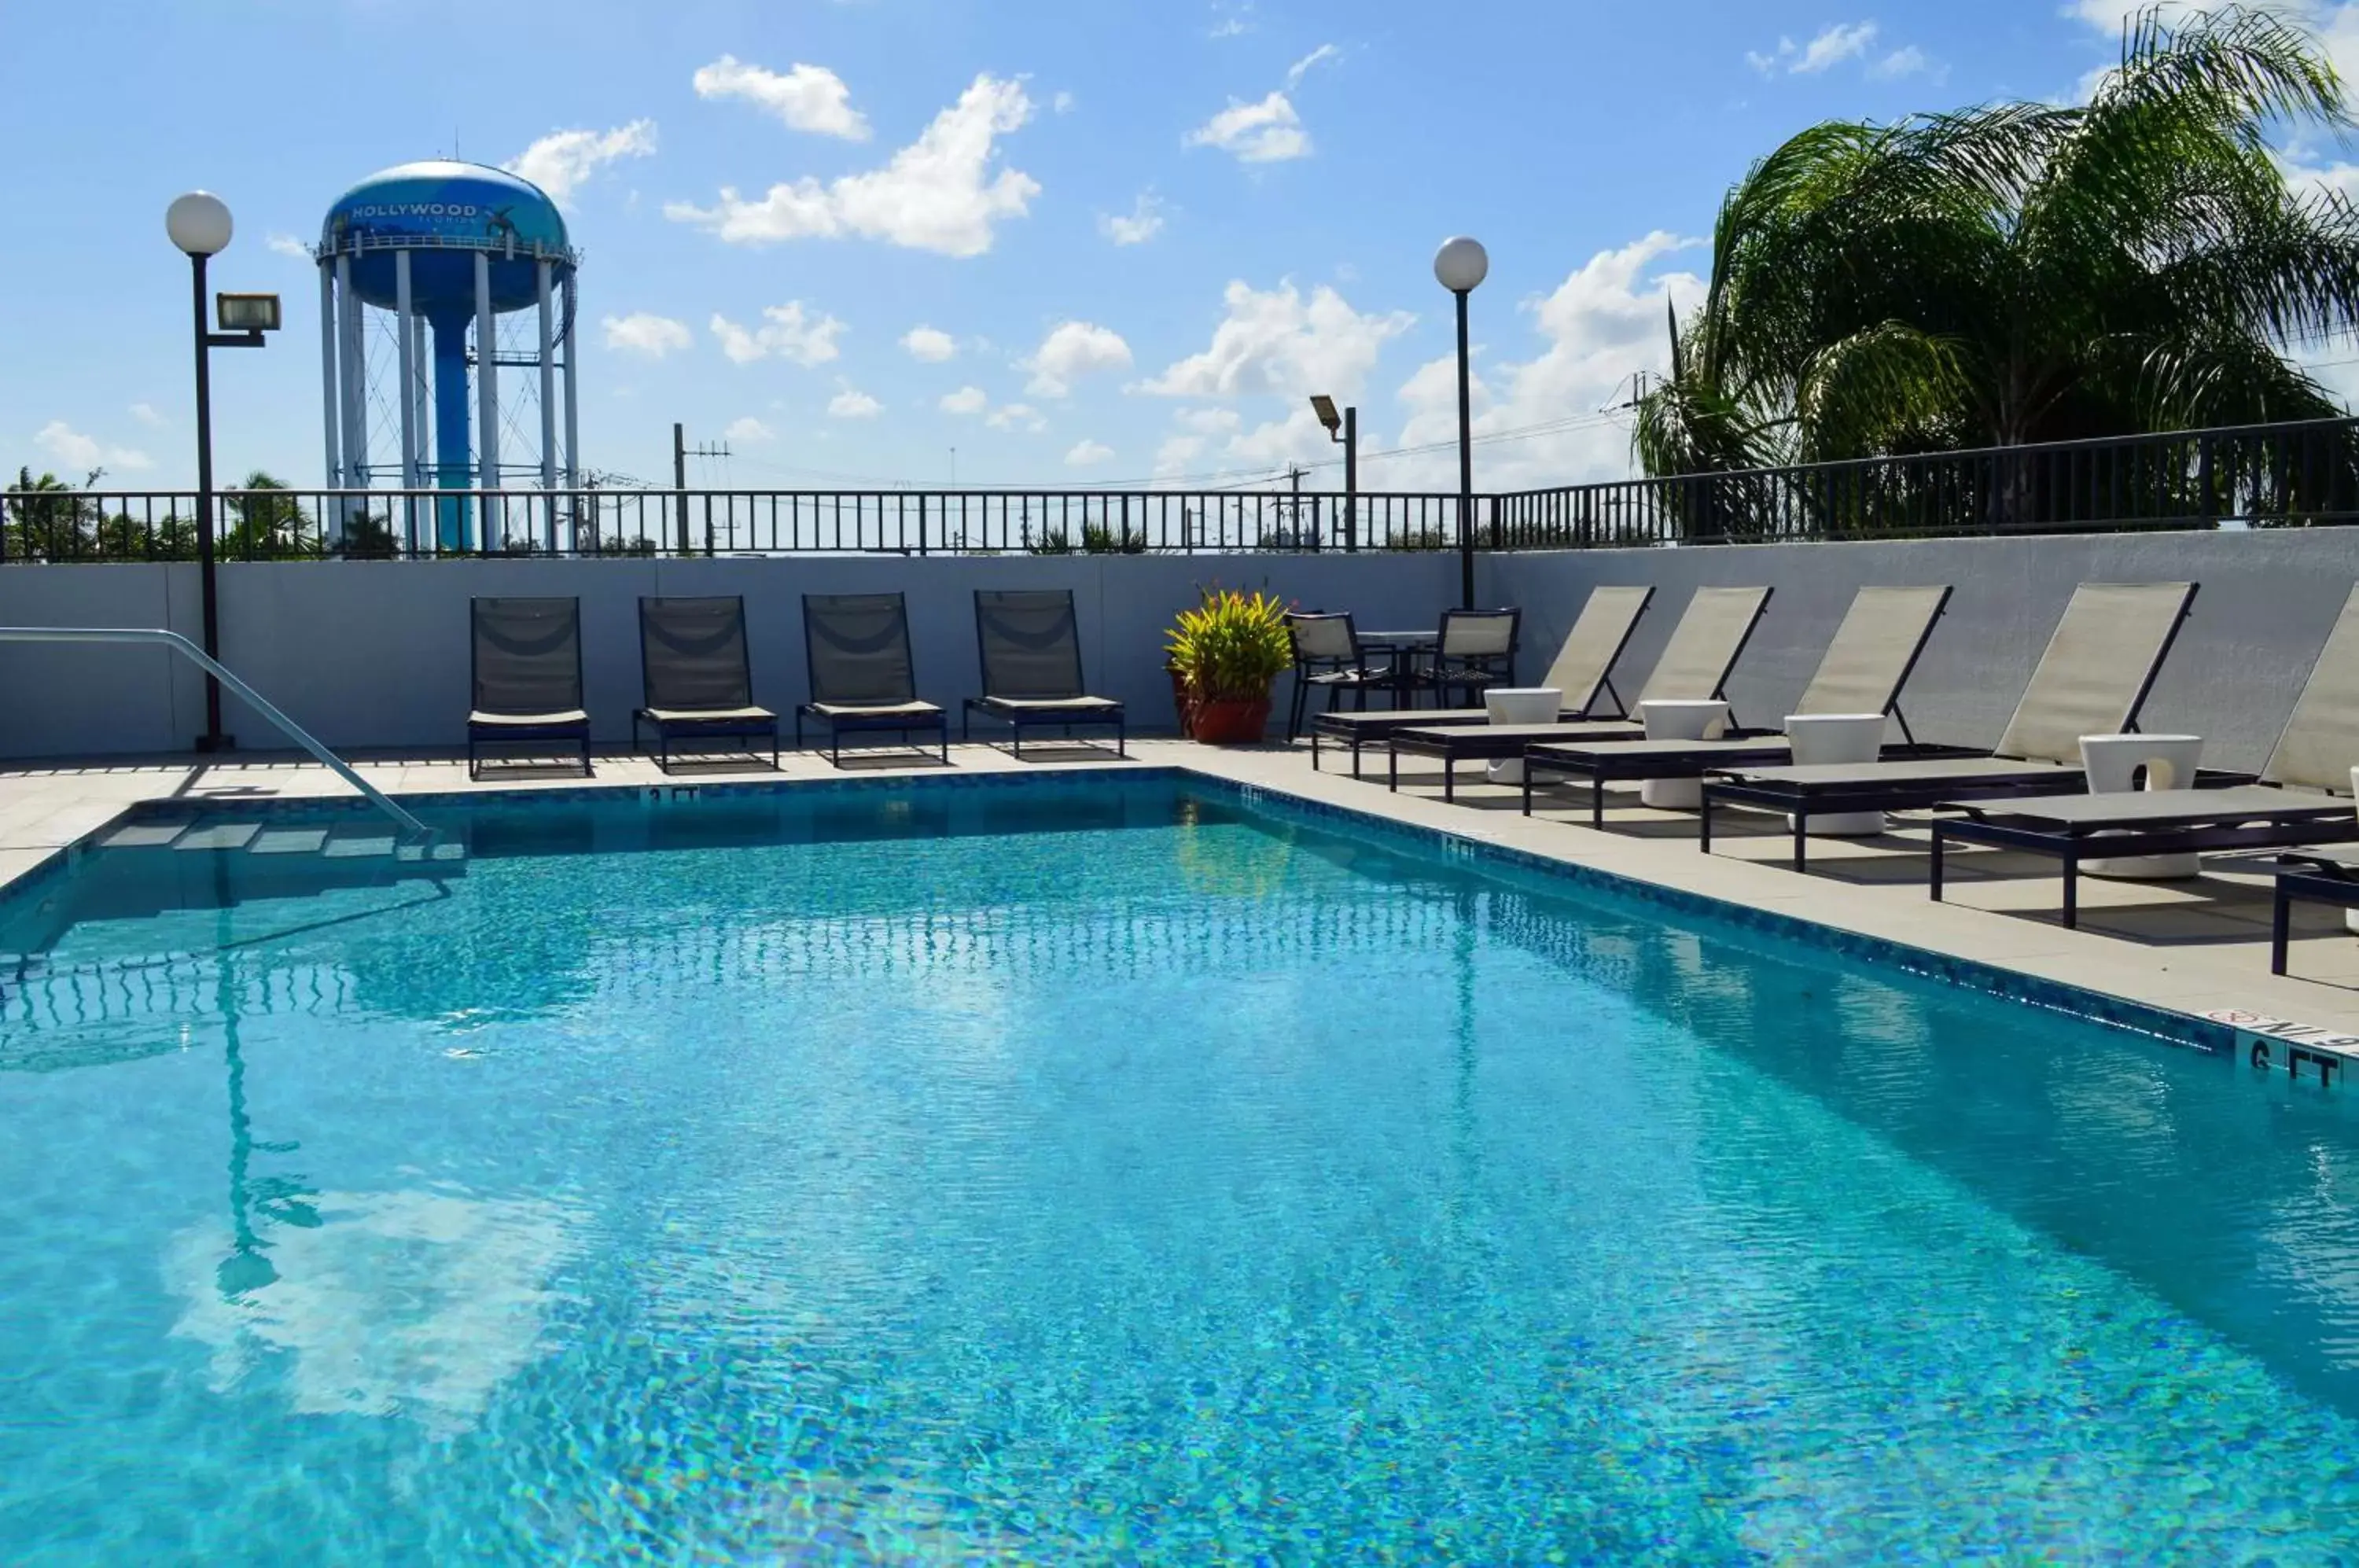 On site, Swimming Pool in GLō Best Western Ft. Lauderdale-Hollywood Airport Hotel